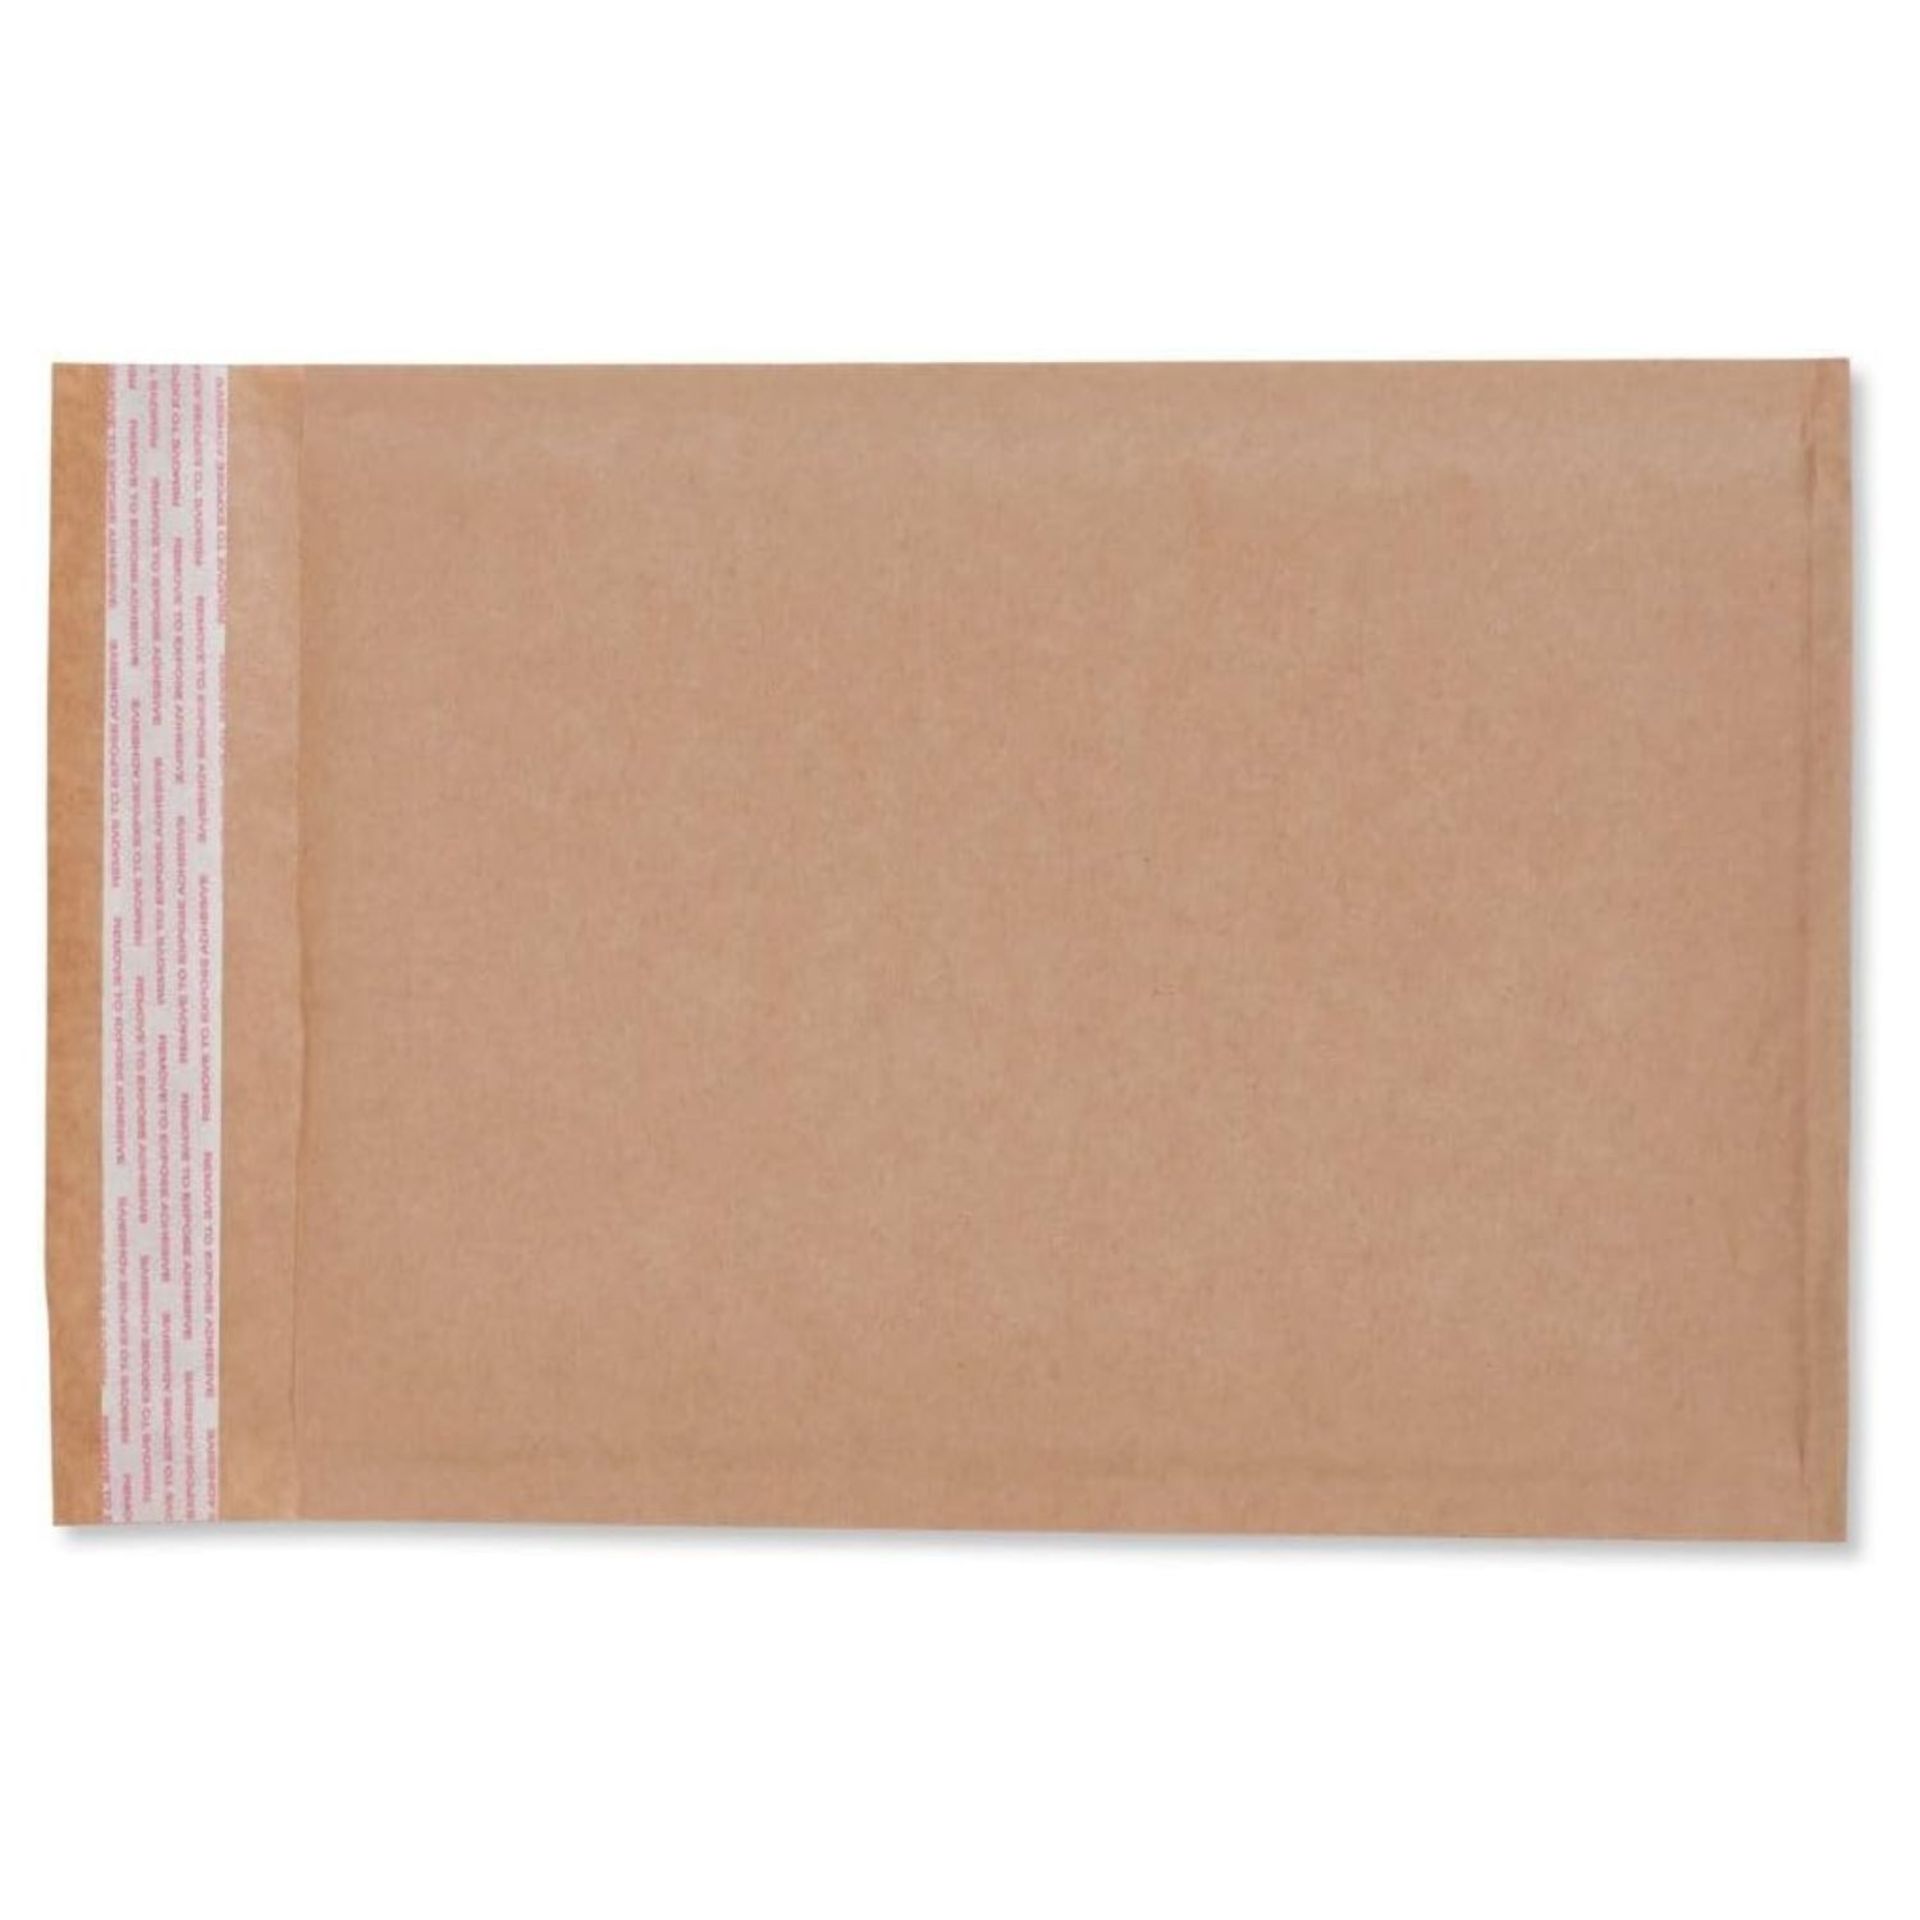 1000 BUBBLE ENVELOPES WITH PEEL AND SEAL TOUGH LIGHT PADDED (120 X 165MM) - Image 4 of 4